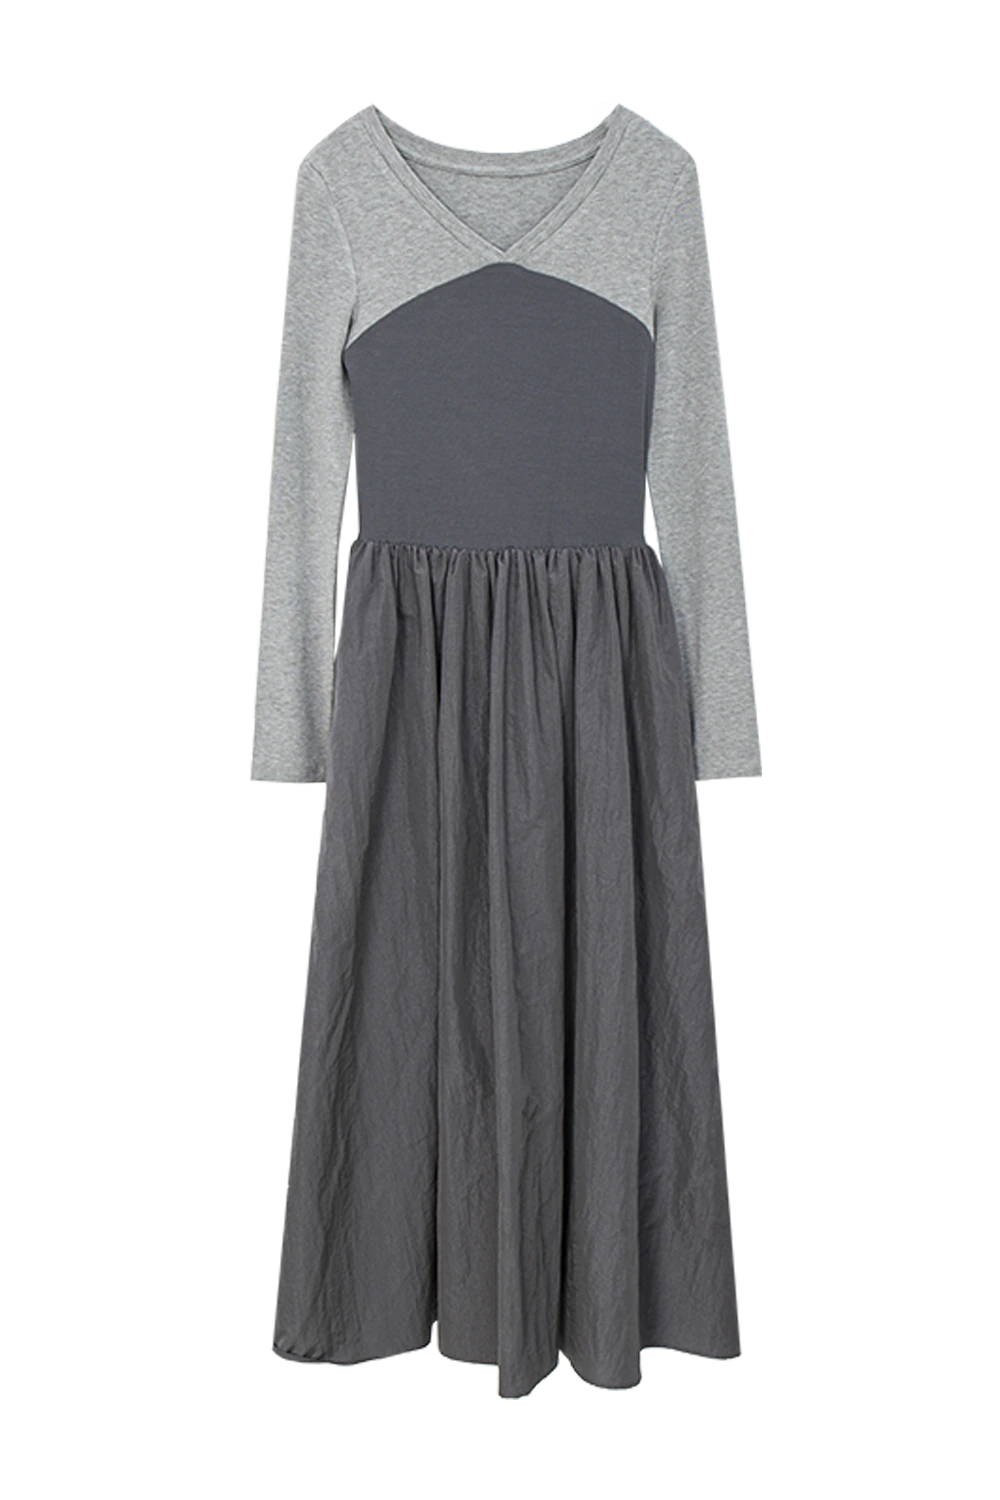 Grey Duo-tone Long-Sleeve Dress with Cinched Waist and Flowy Pleated Skirt